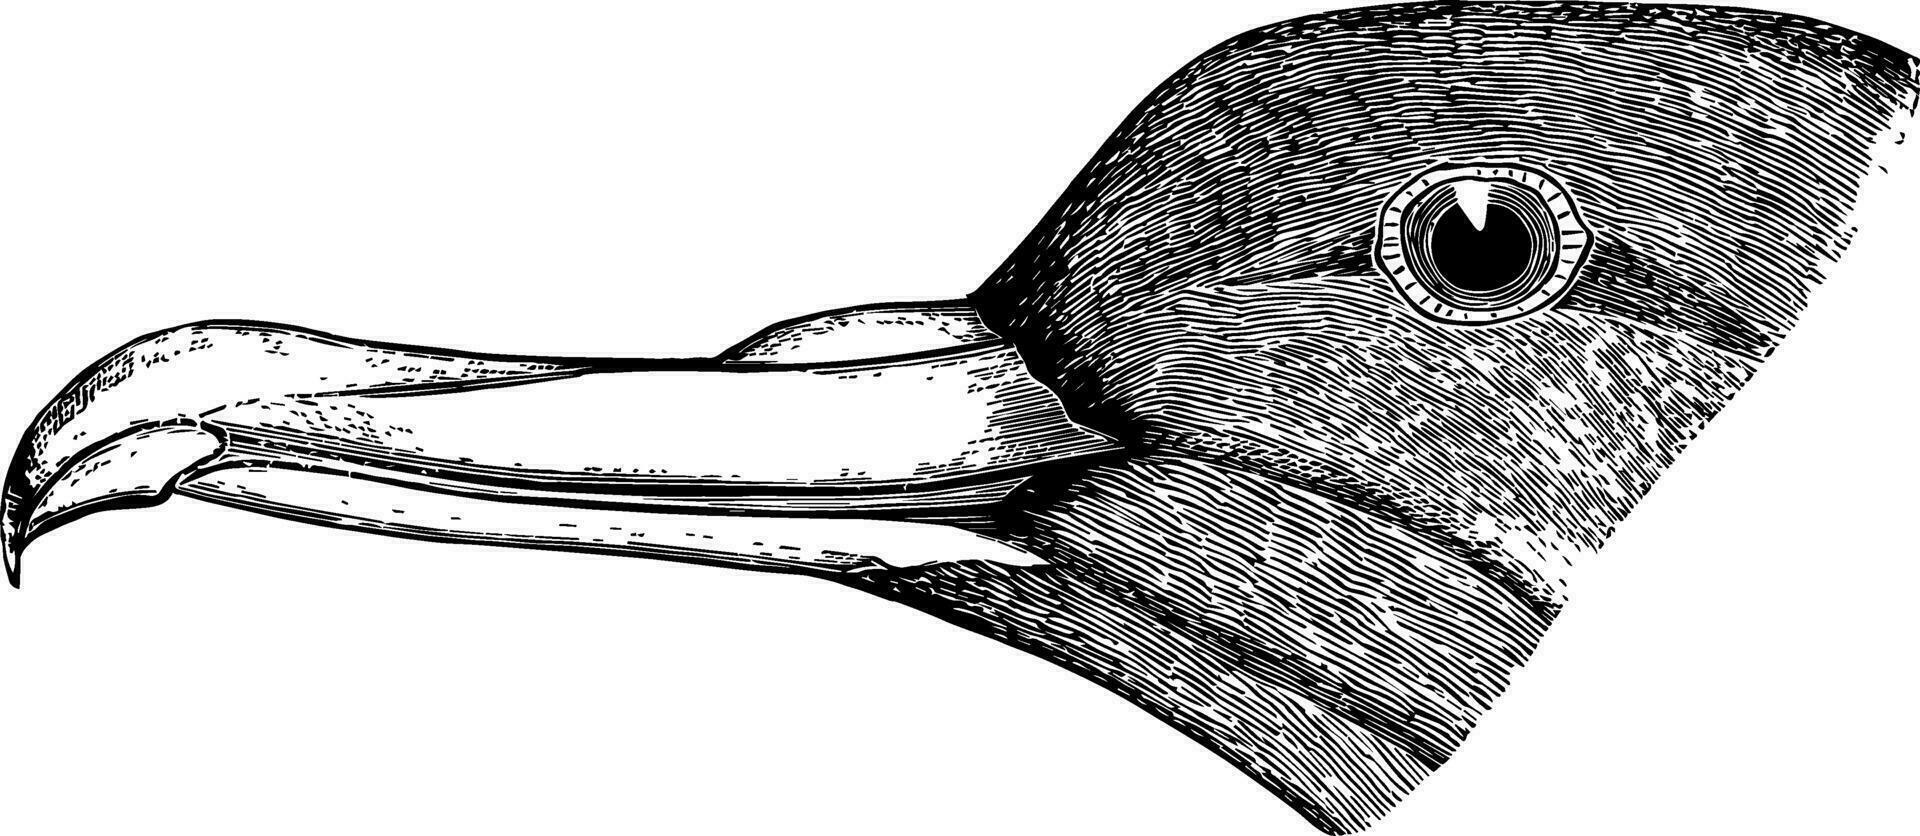 Sooty Shearwater vintage illustration. vector